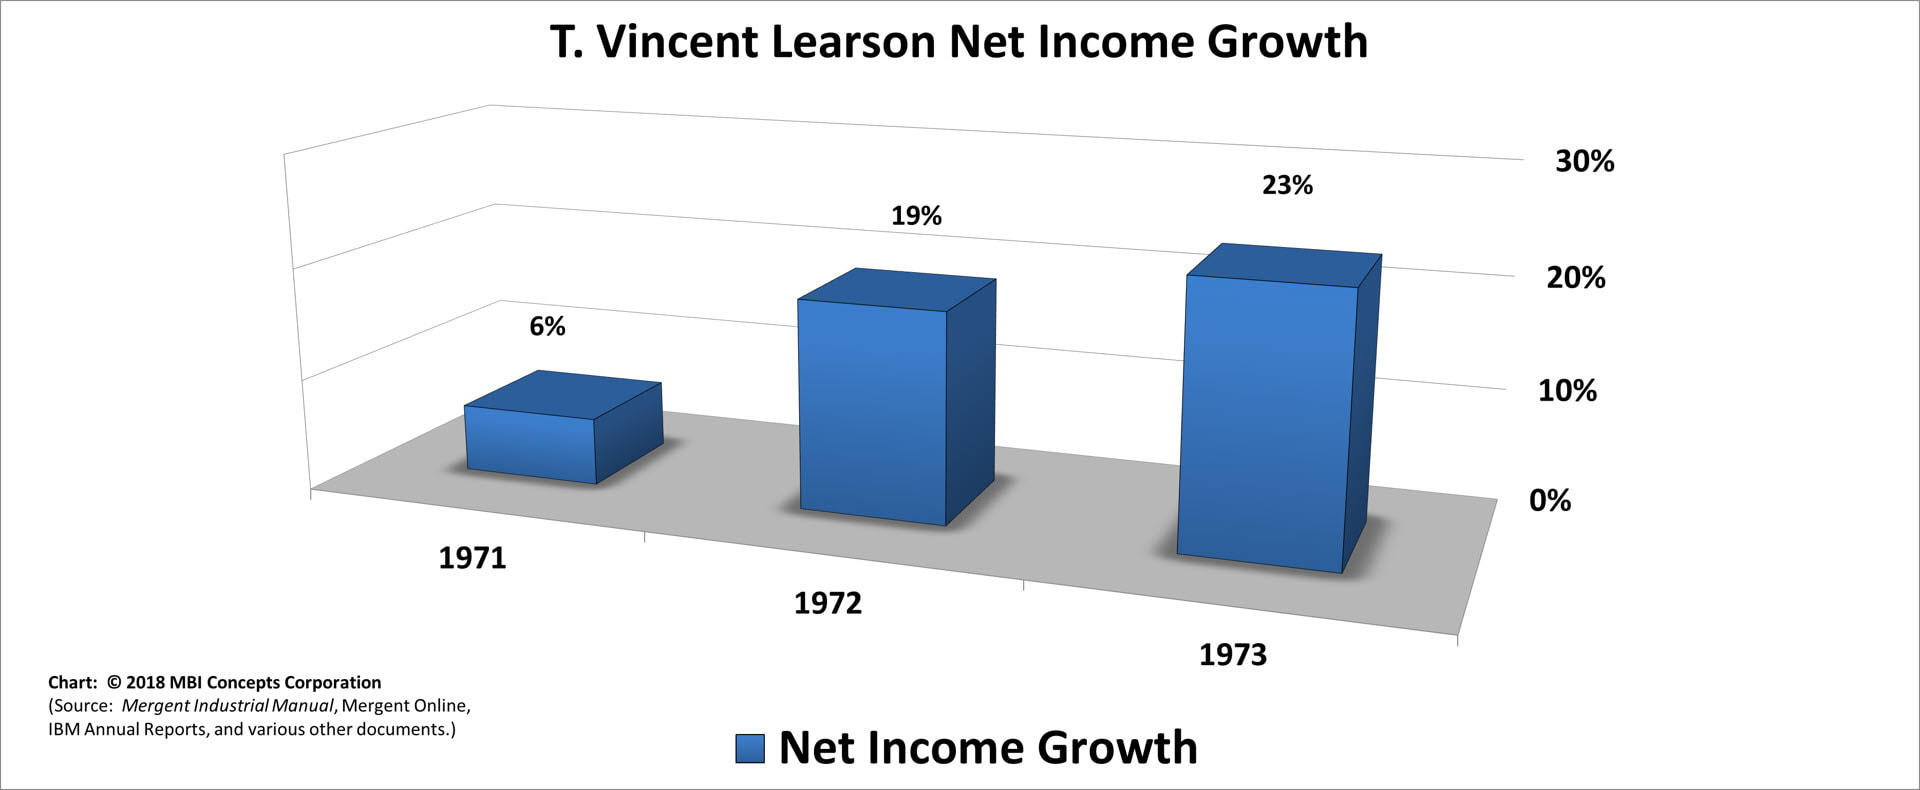 A color bar chart showing IBM's net income (profit) growth from 1971 to 1973 for T. Vincent (Vin) Learson.